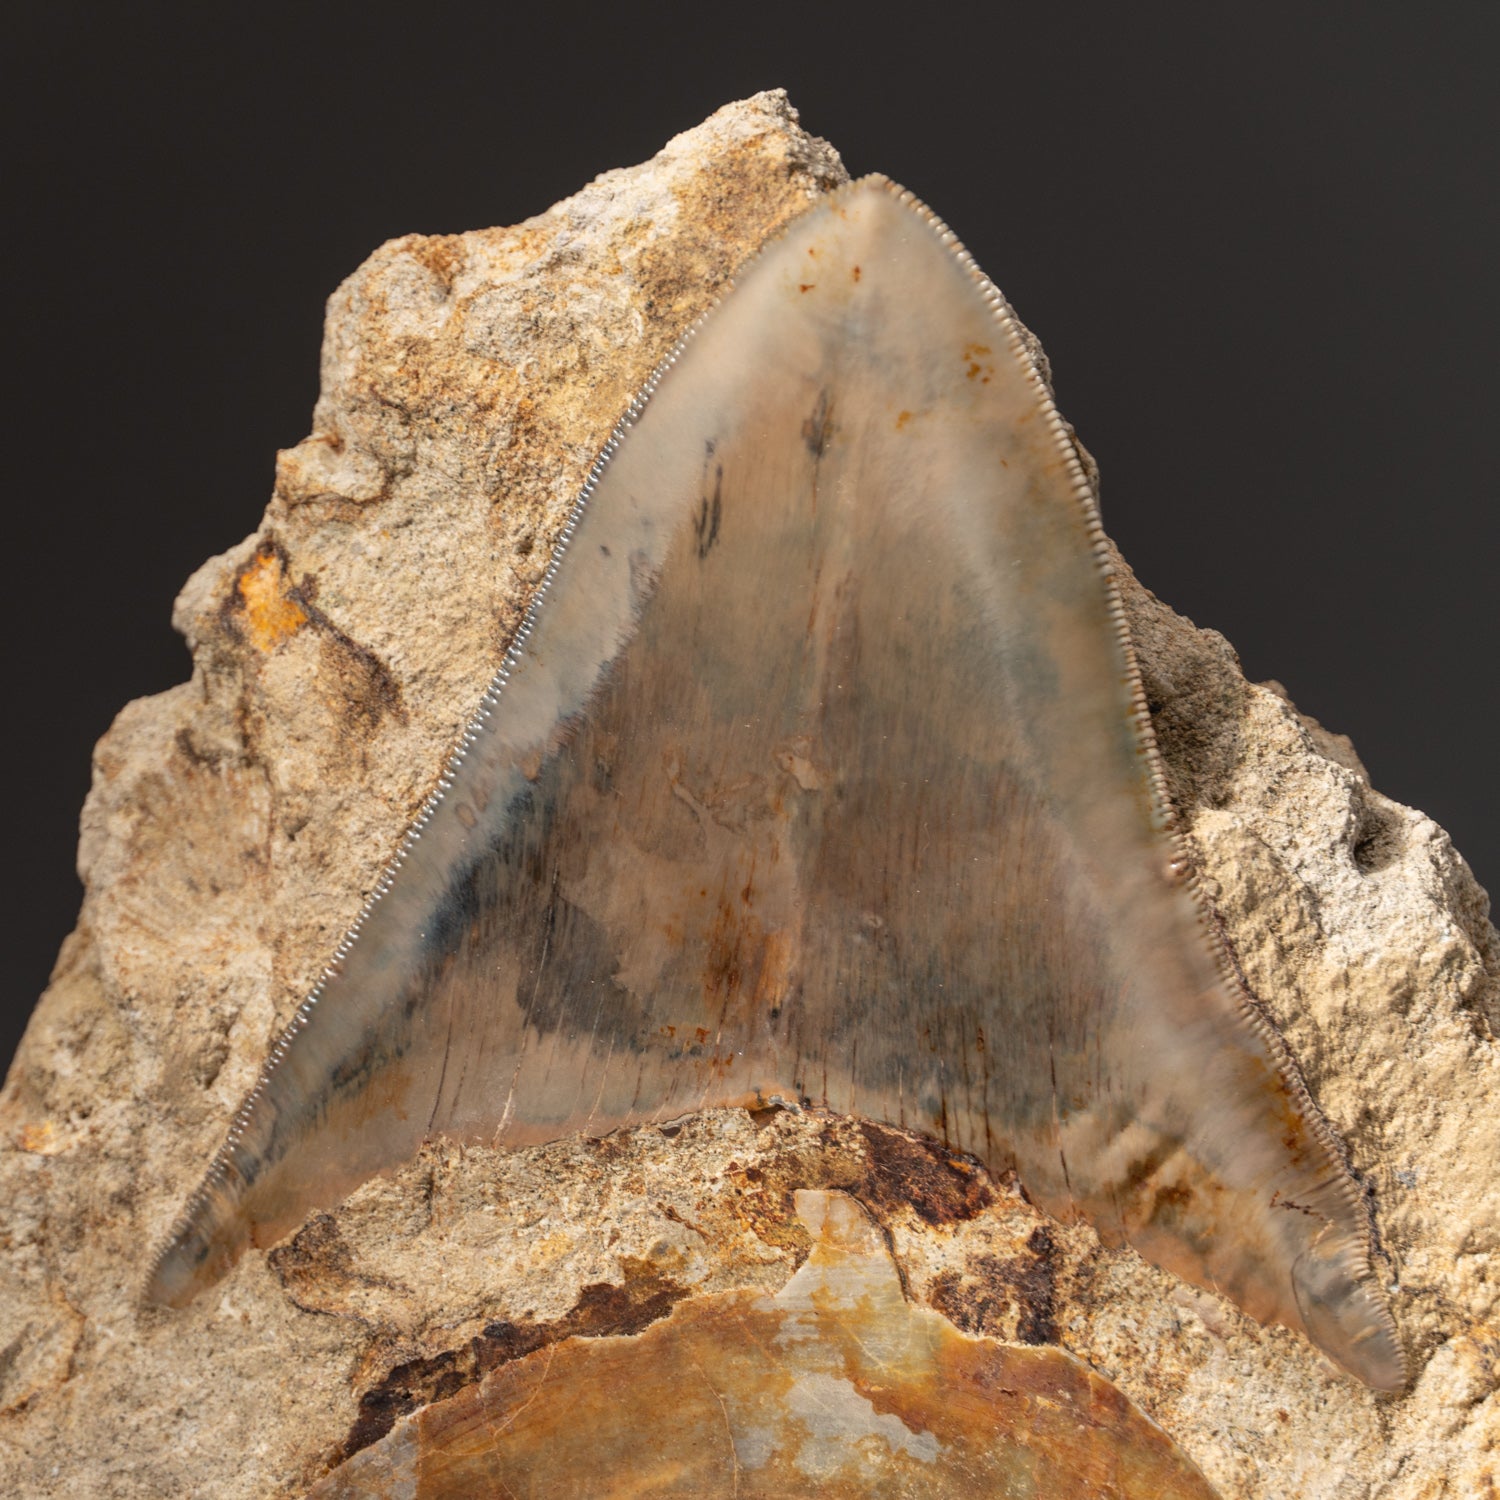 Giant Genuine Megalodon Shark Tooth in Matrix from Indonesia